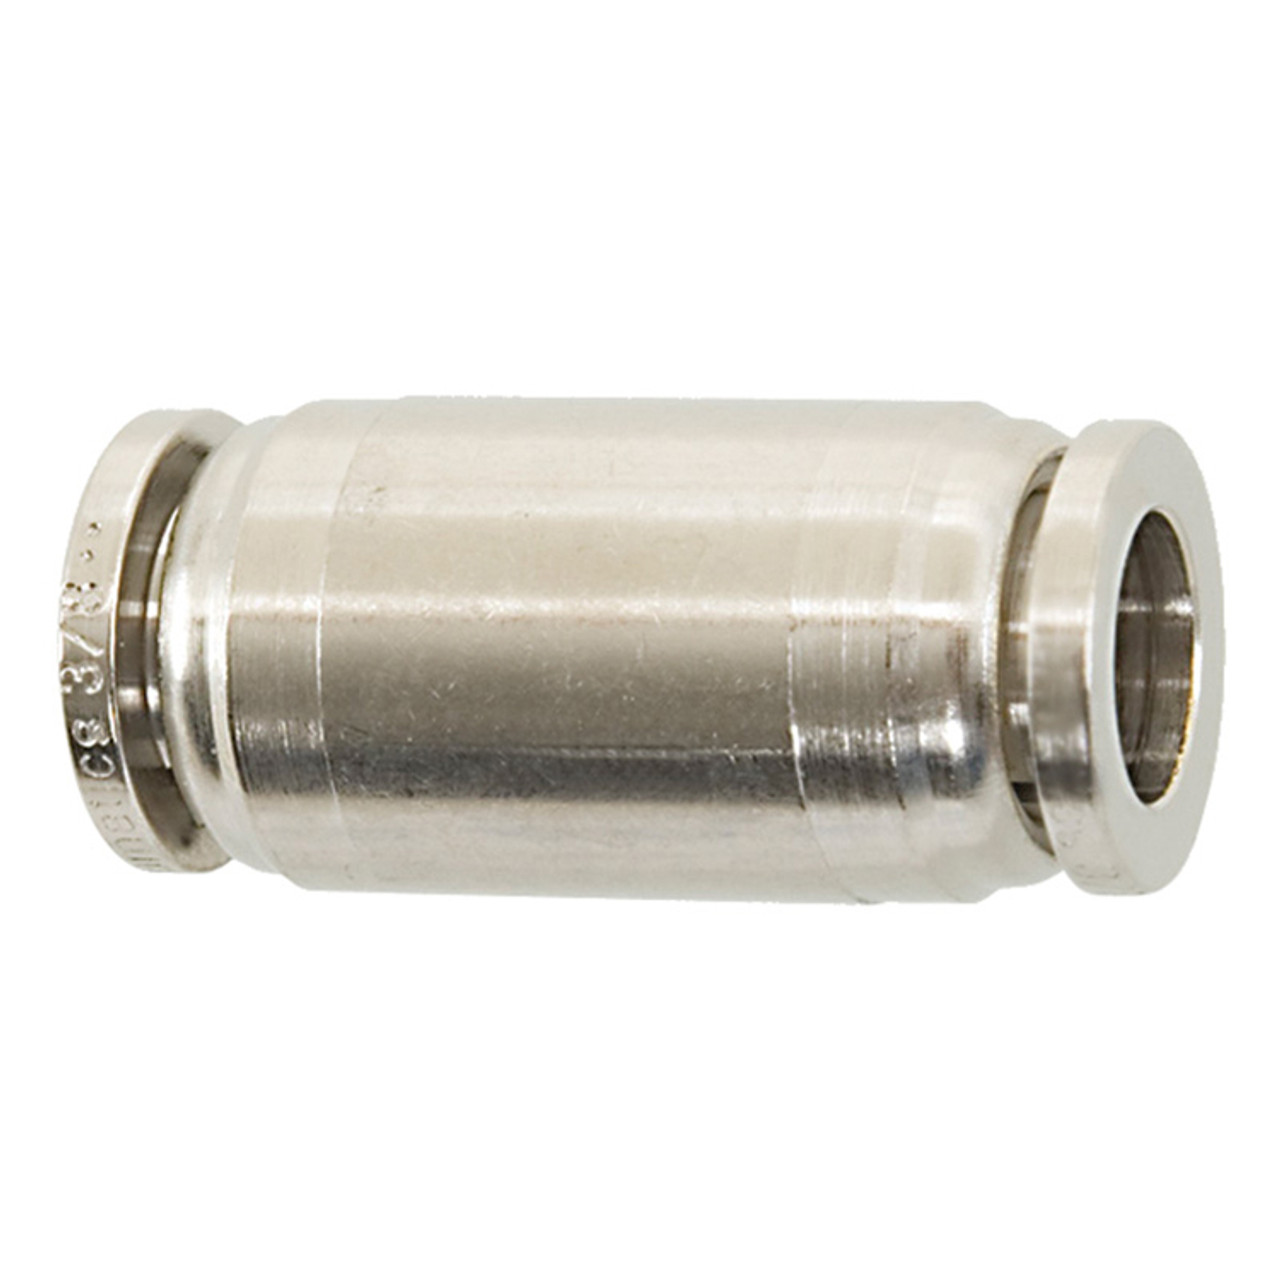 1/8" Nickel Plated Brass Push-To-Connect Union   G6060P-02-02